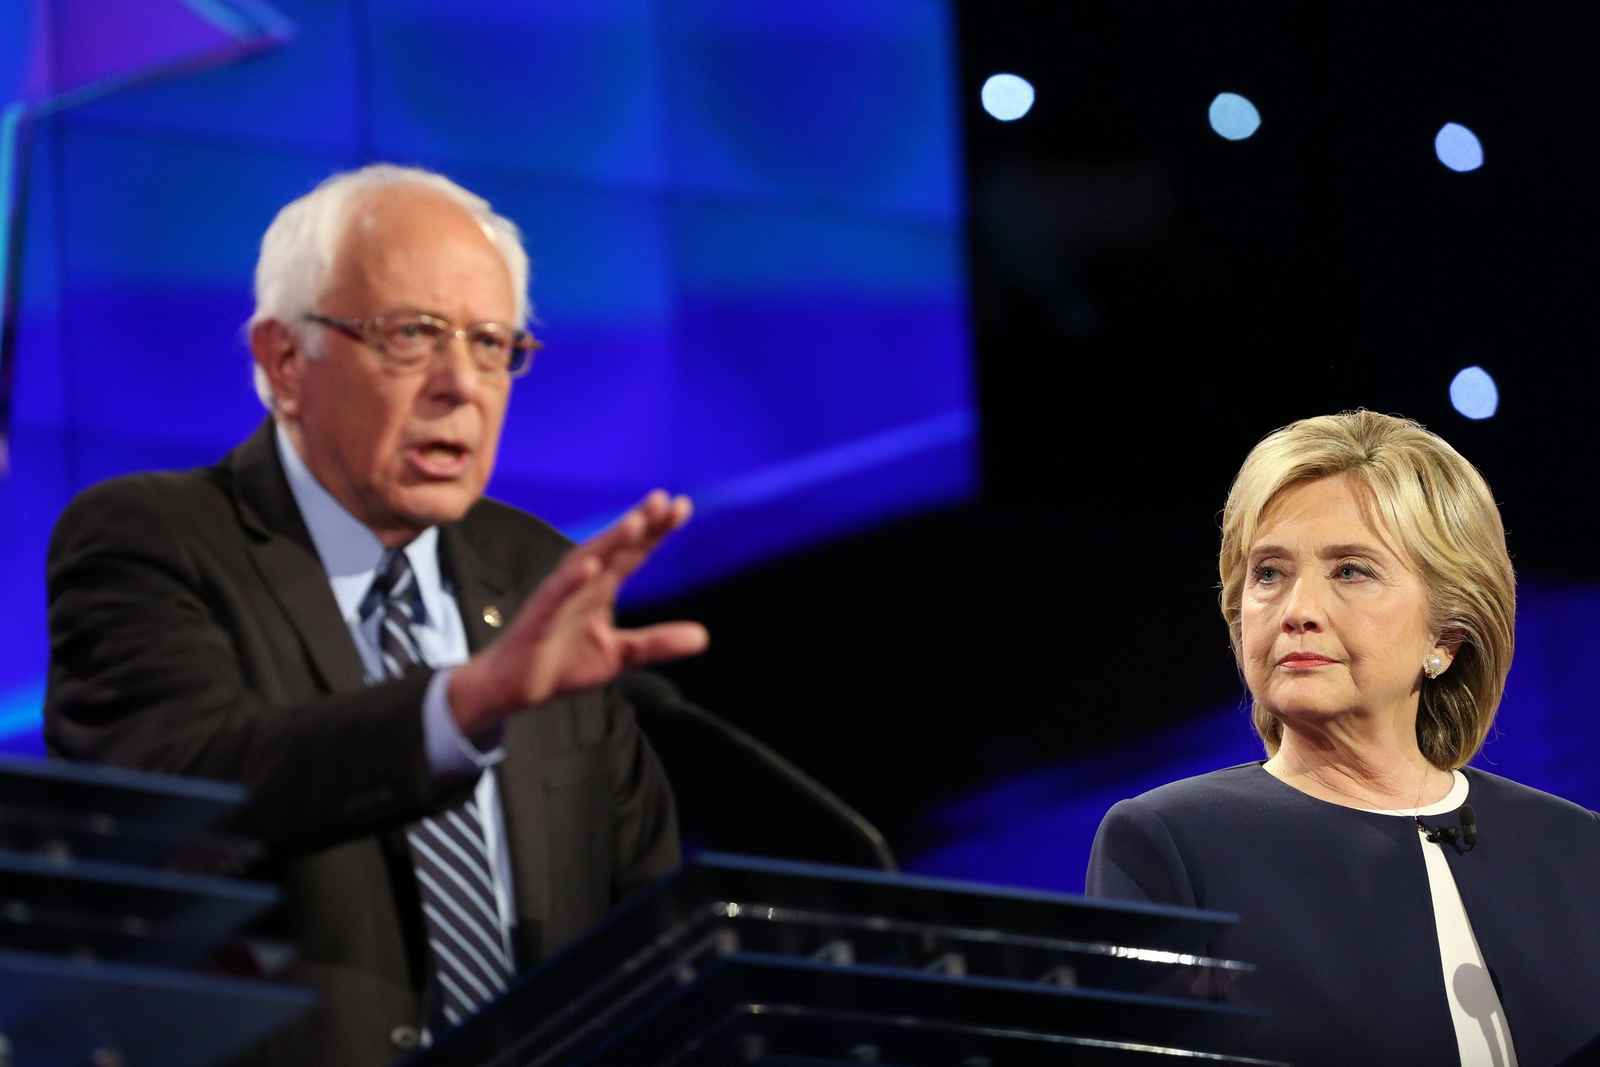 Bernie Sanders and Hillary Clinton at the CNN Democratic Debate at the Wynn Hotel in Las Vegas, Tuesday, October 13, 2015.